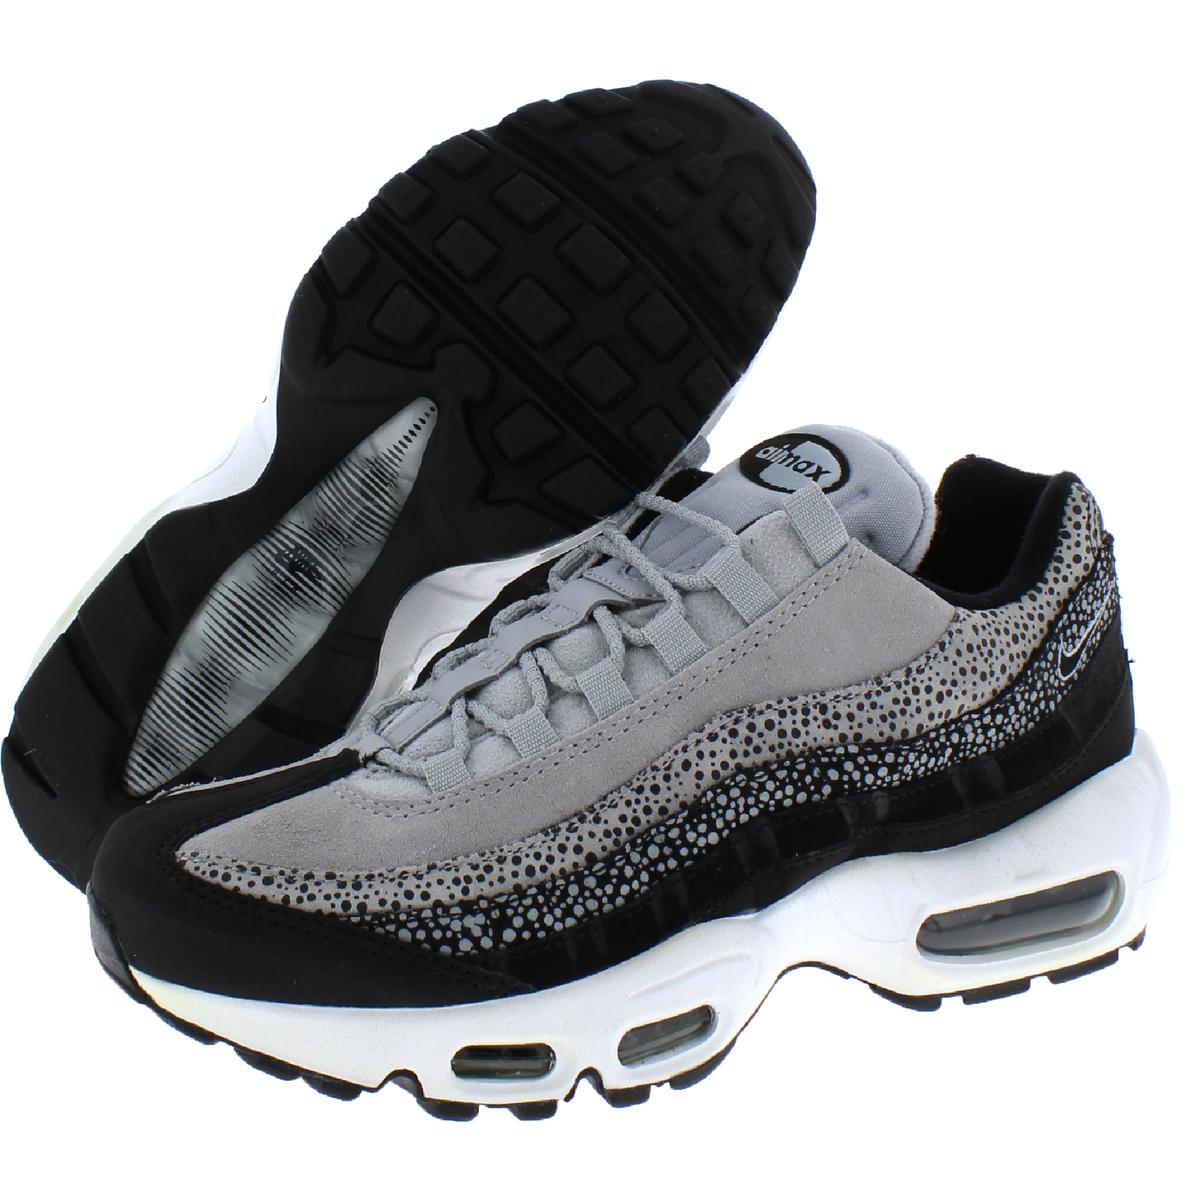 Nike Womens Air Max 95 Premium Fitness Chunky Running Shoes Sneakers